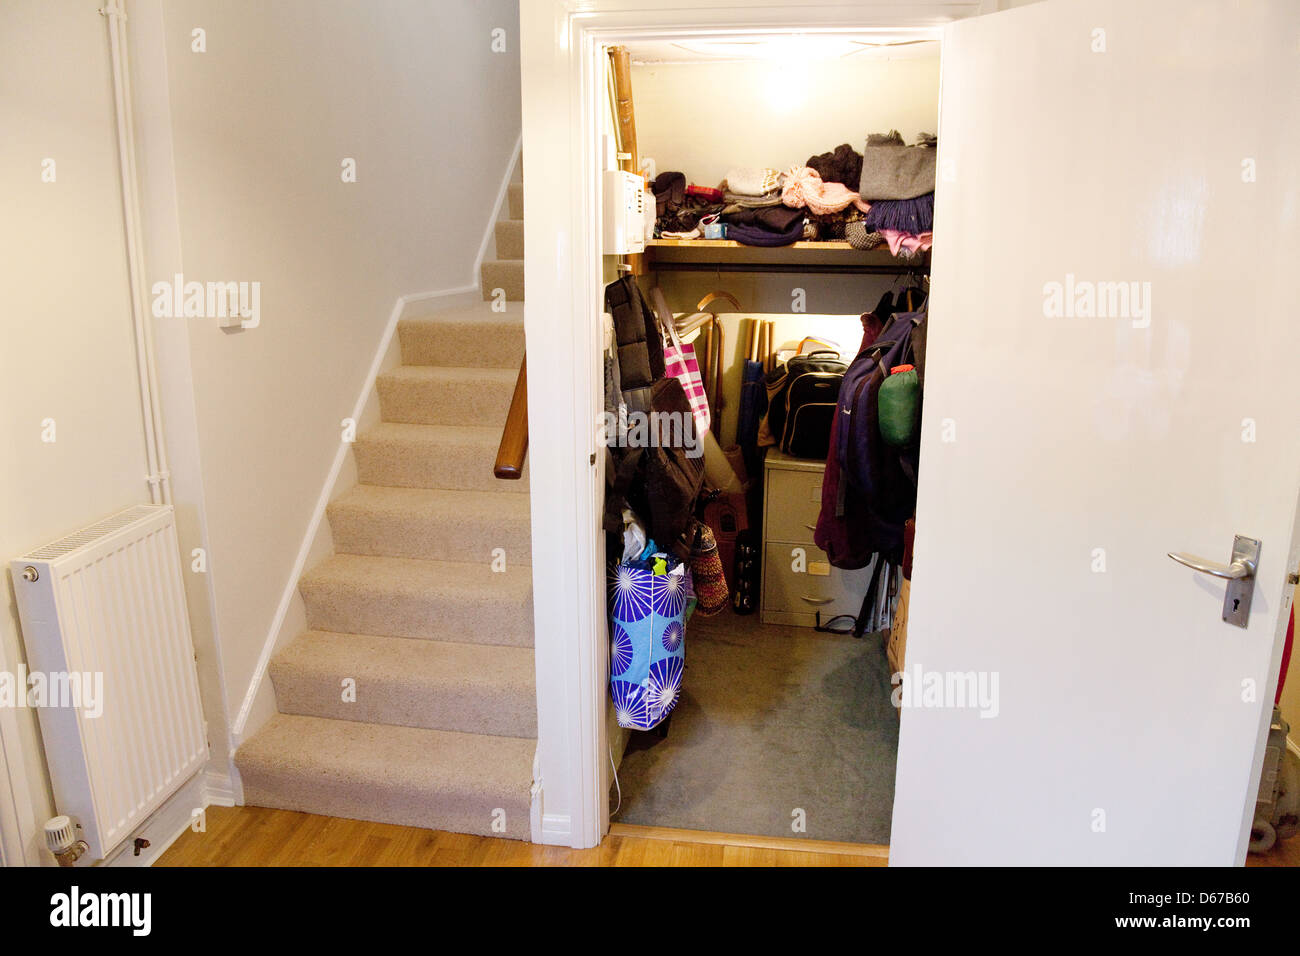 https://c8.alamy.com/comp/D67B60/cupboard-under-the-stairs-an-understairs-cupboard-for-extra-storage-D67B60.jpg